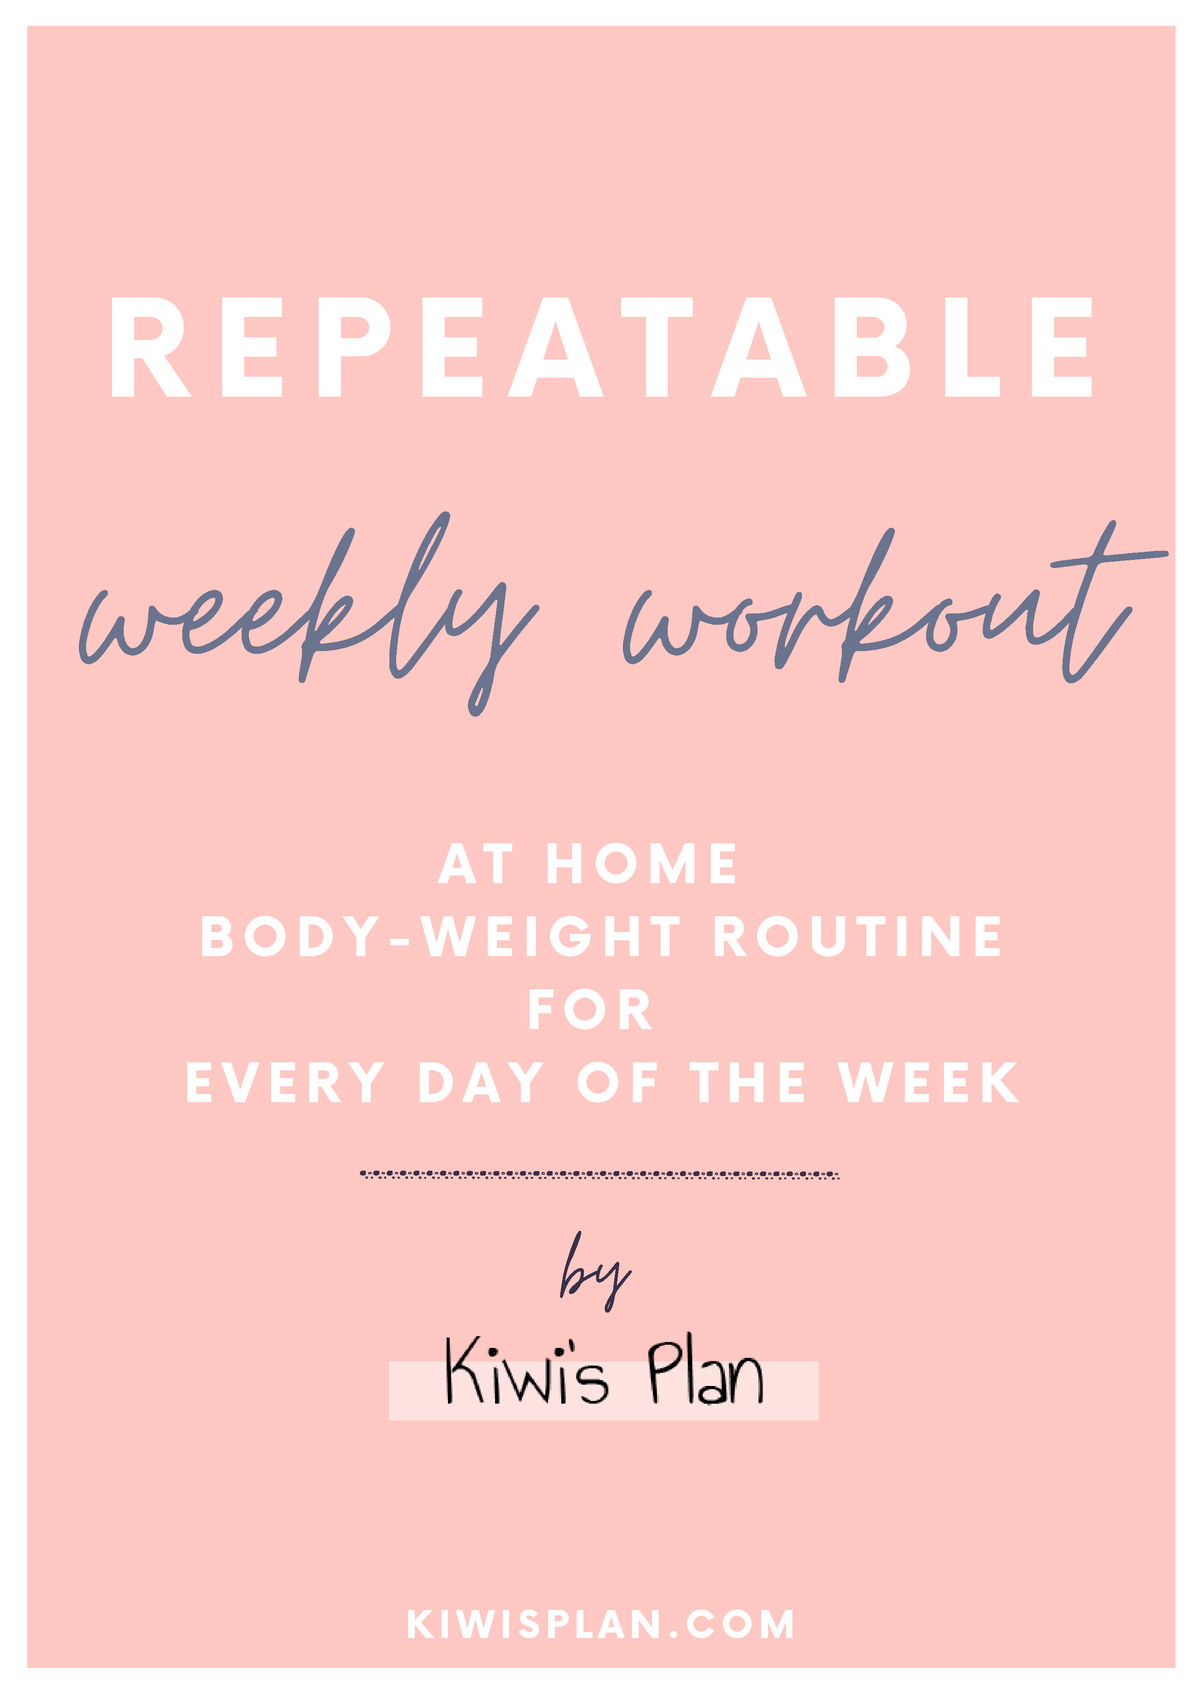 Repeatable-weekly-workout - weekly workout A T H O M E B O D Y-W E I G ...